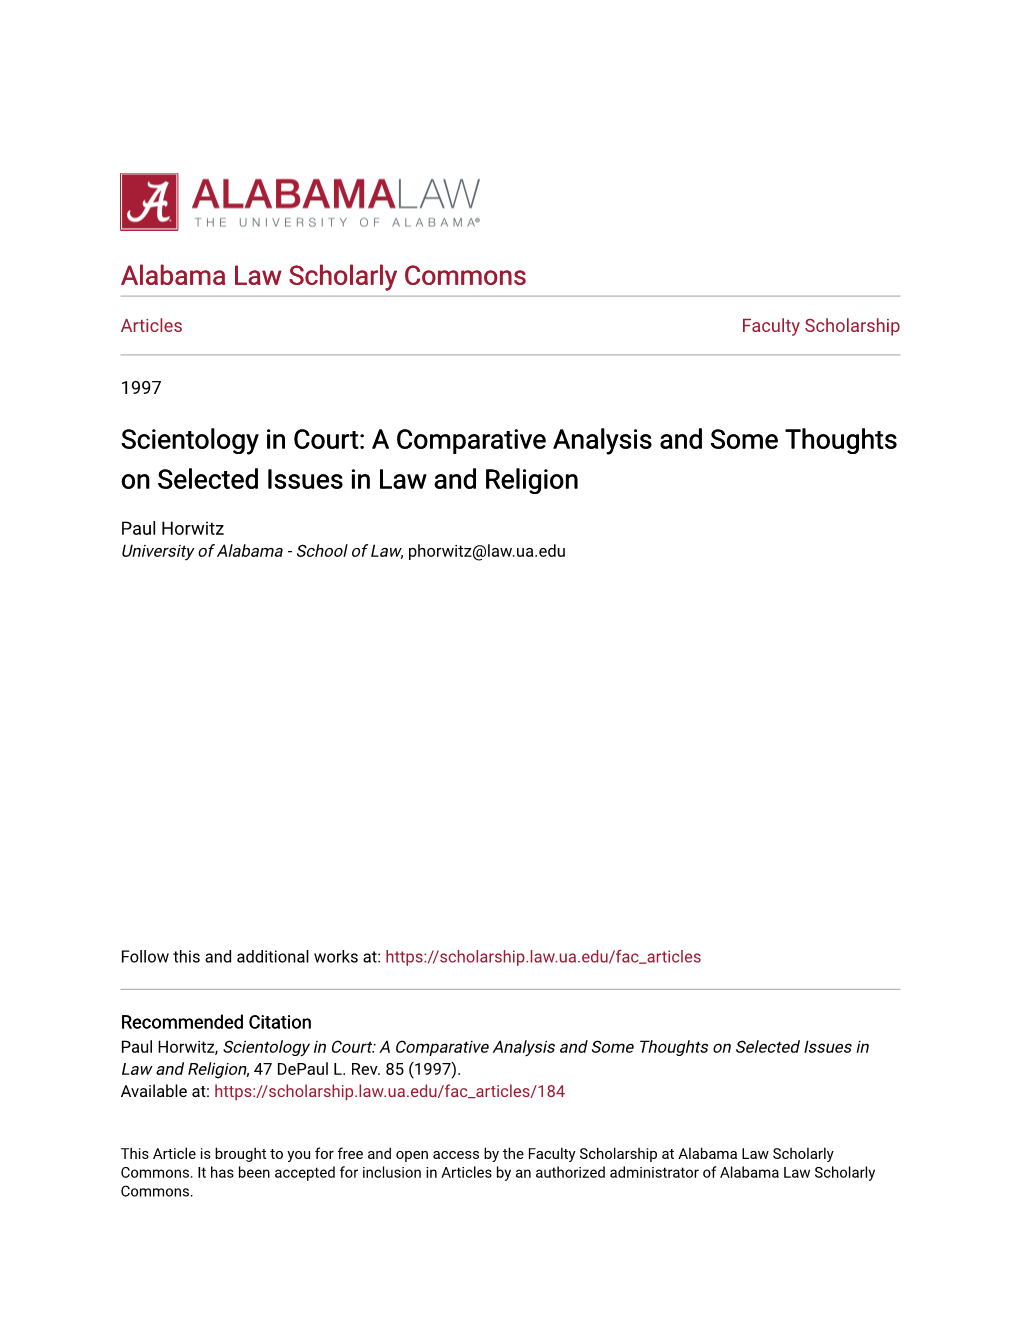 Scientology in Court: a Comparative Analysis and Some Thoughts on Selected Issues in Law and Religion